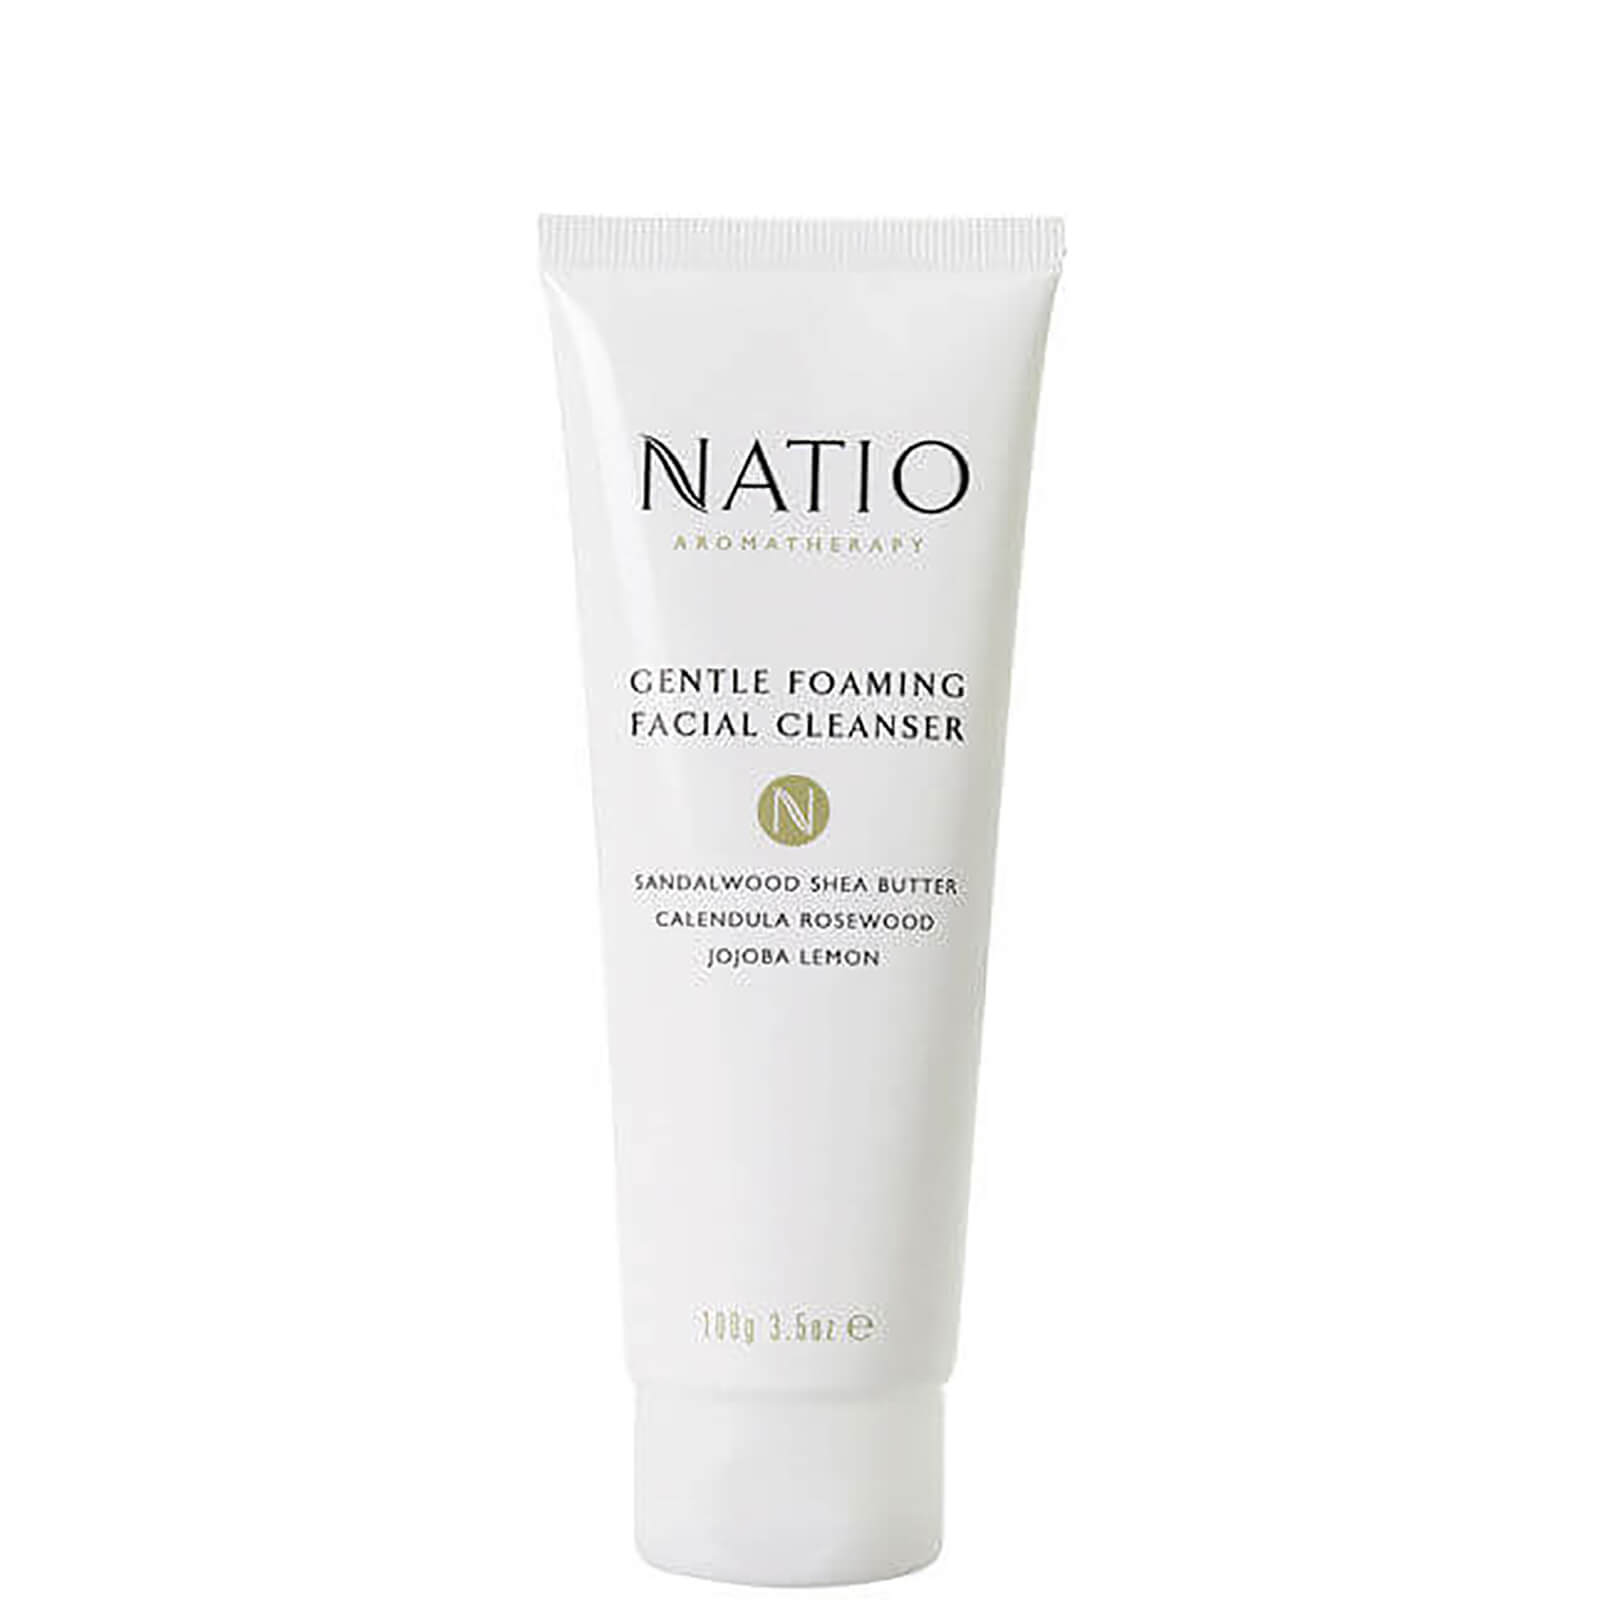 Natio Gentle Foaming Facial Cleanser (100g)